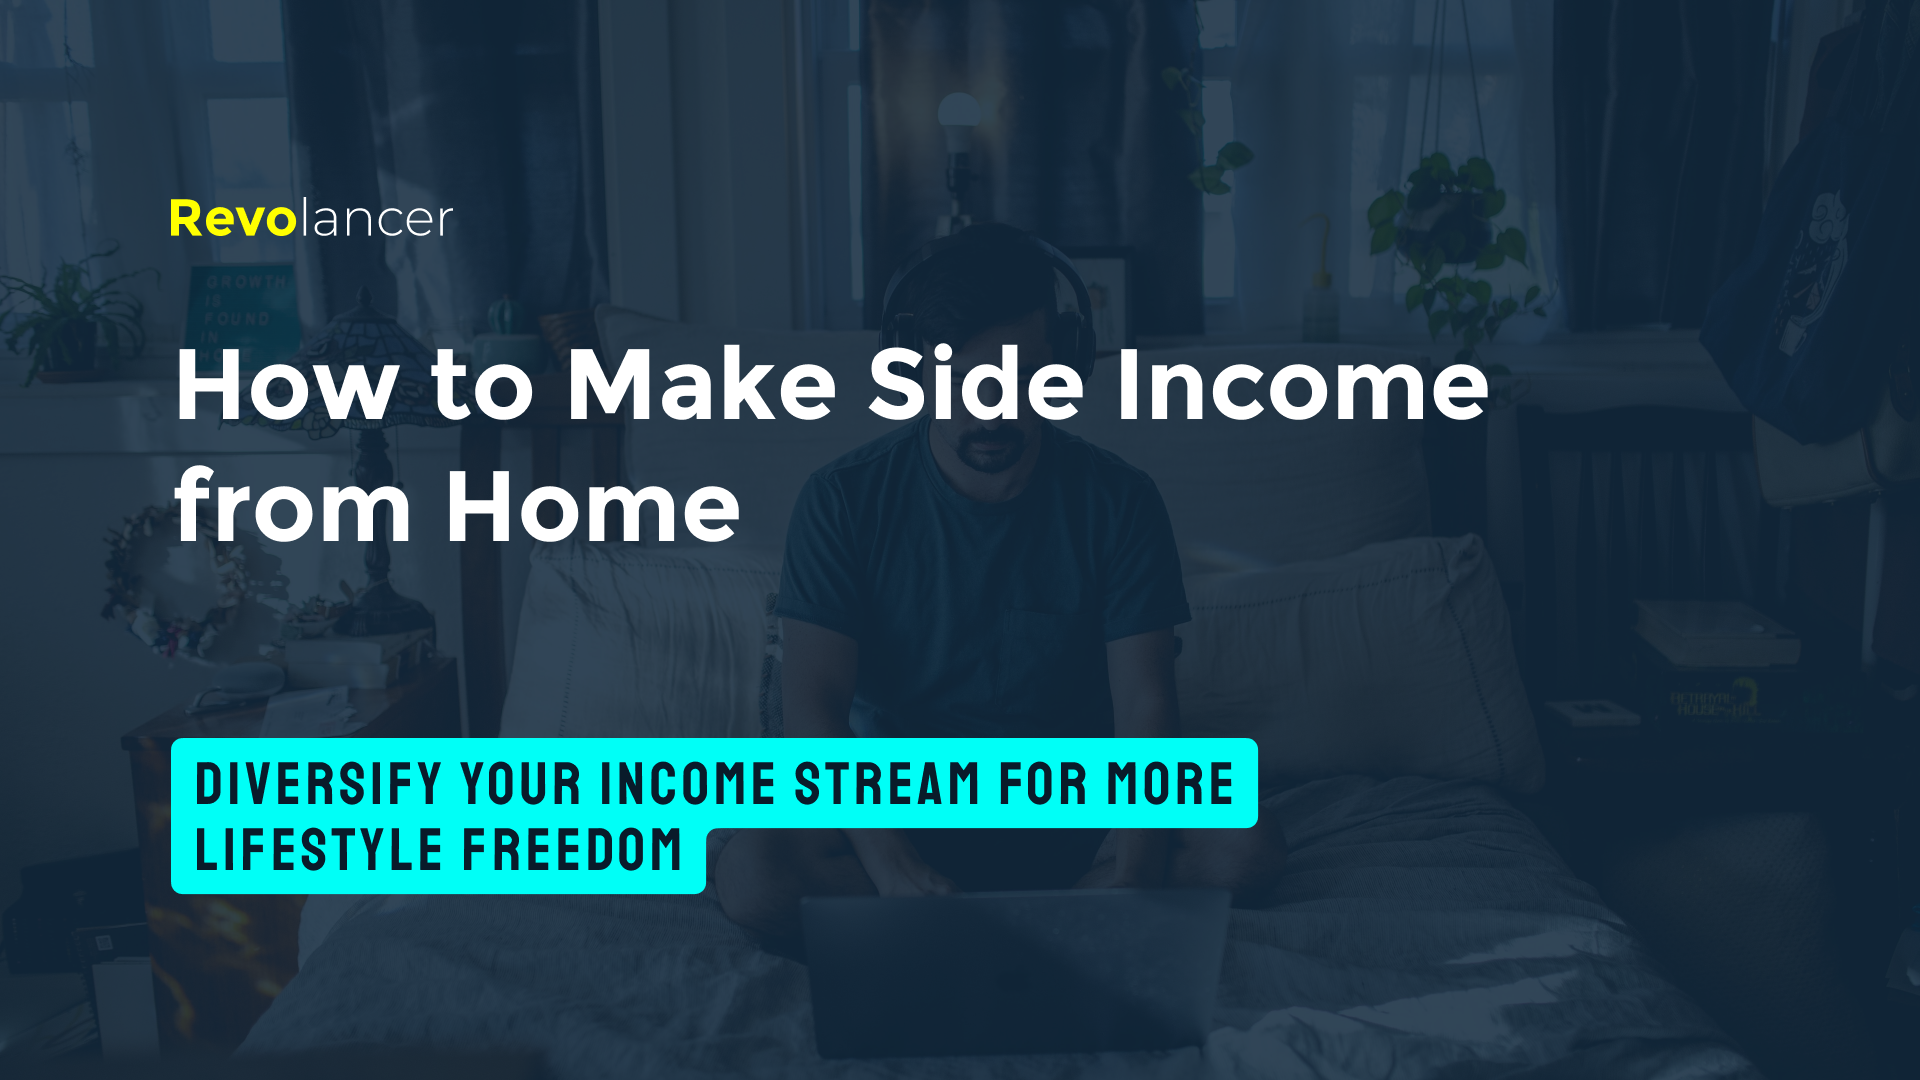 How to Make Side Income From Home